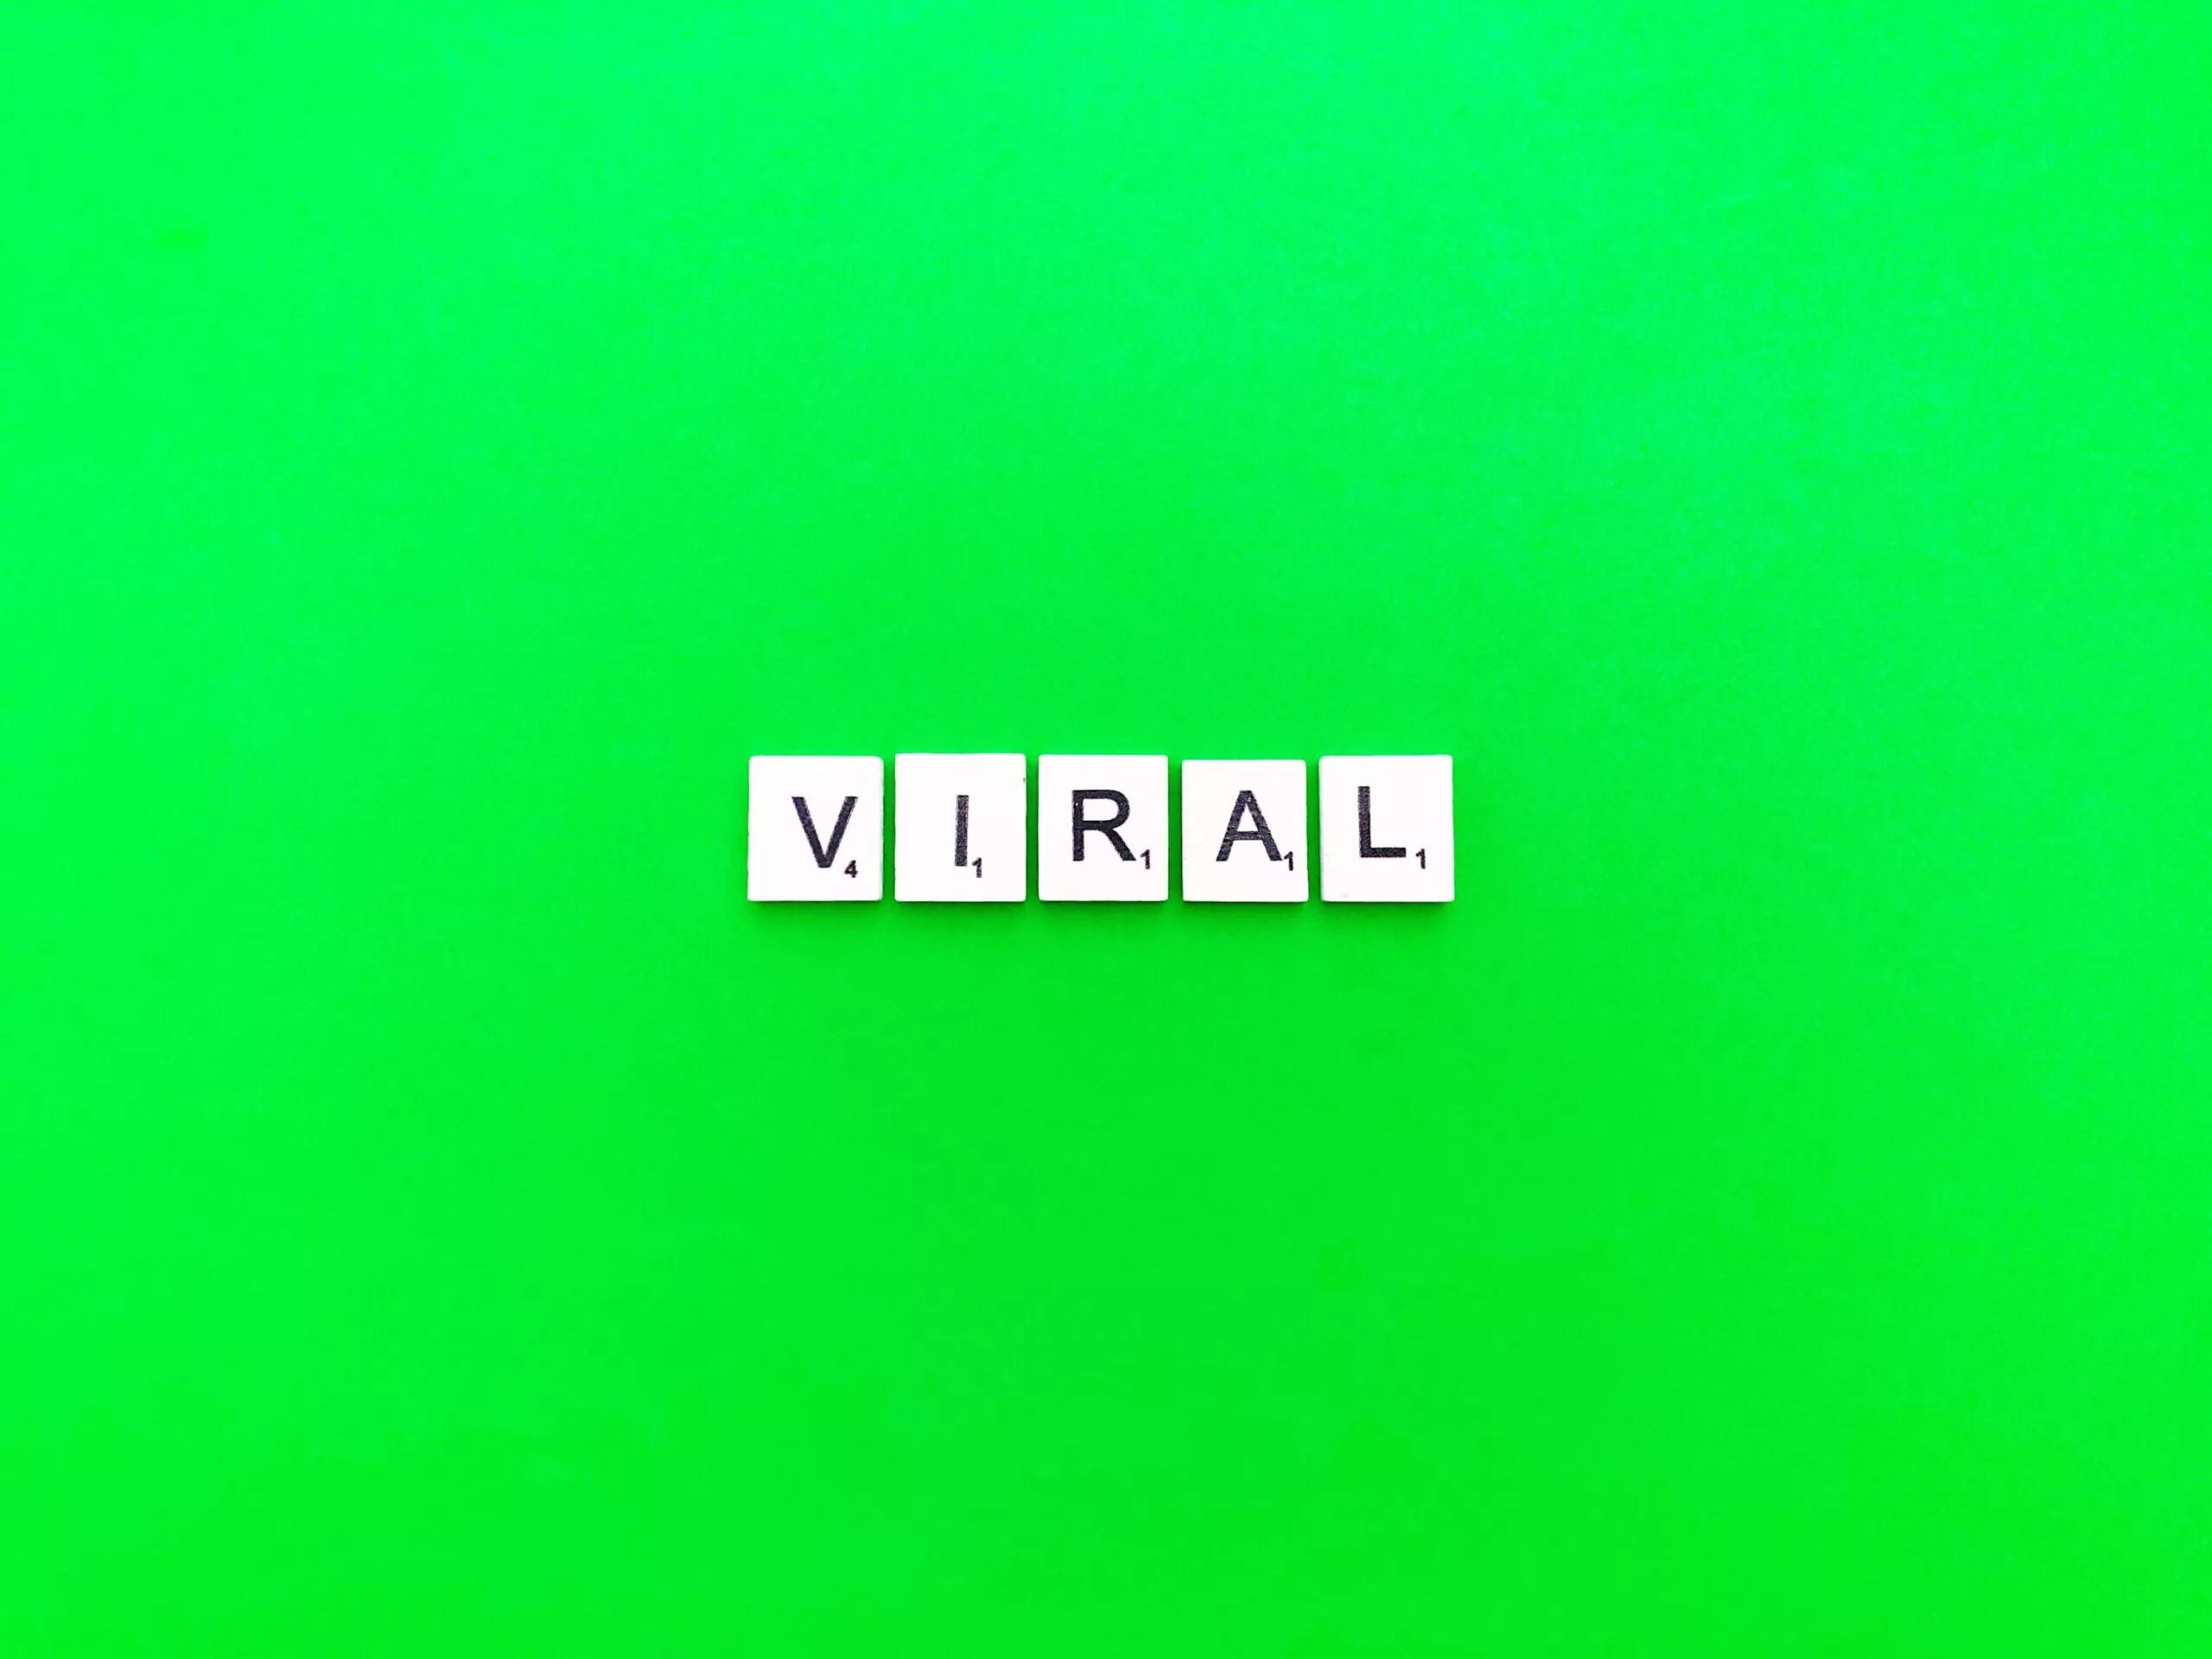 Does Your Brand Have What It Takes to Be a Viral Brand?